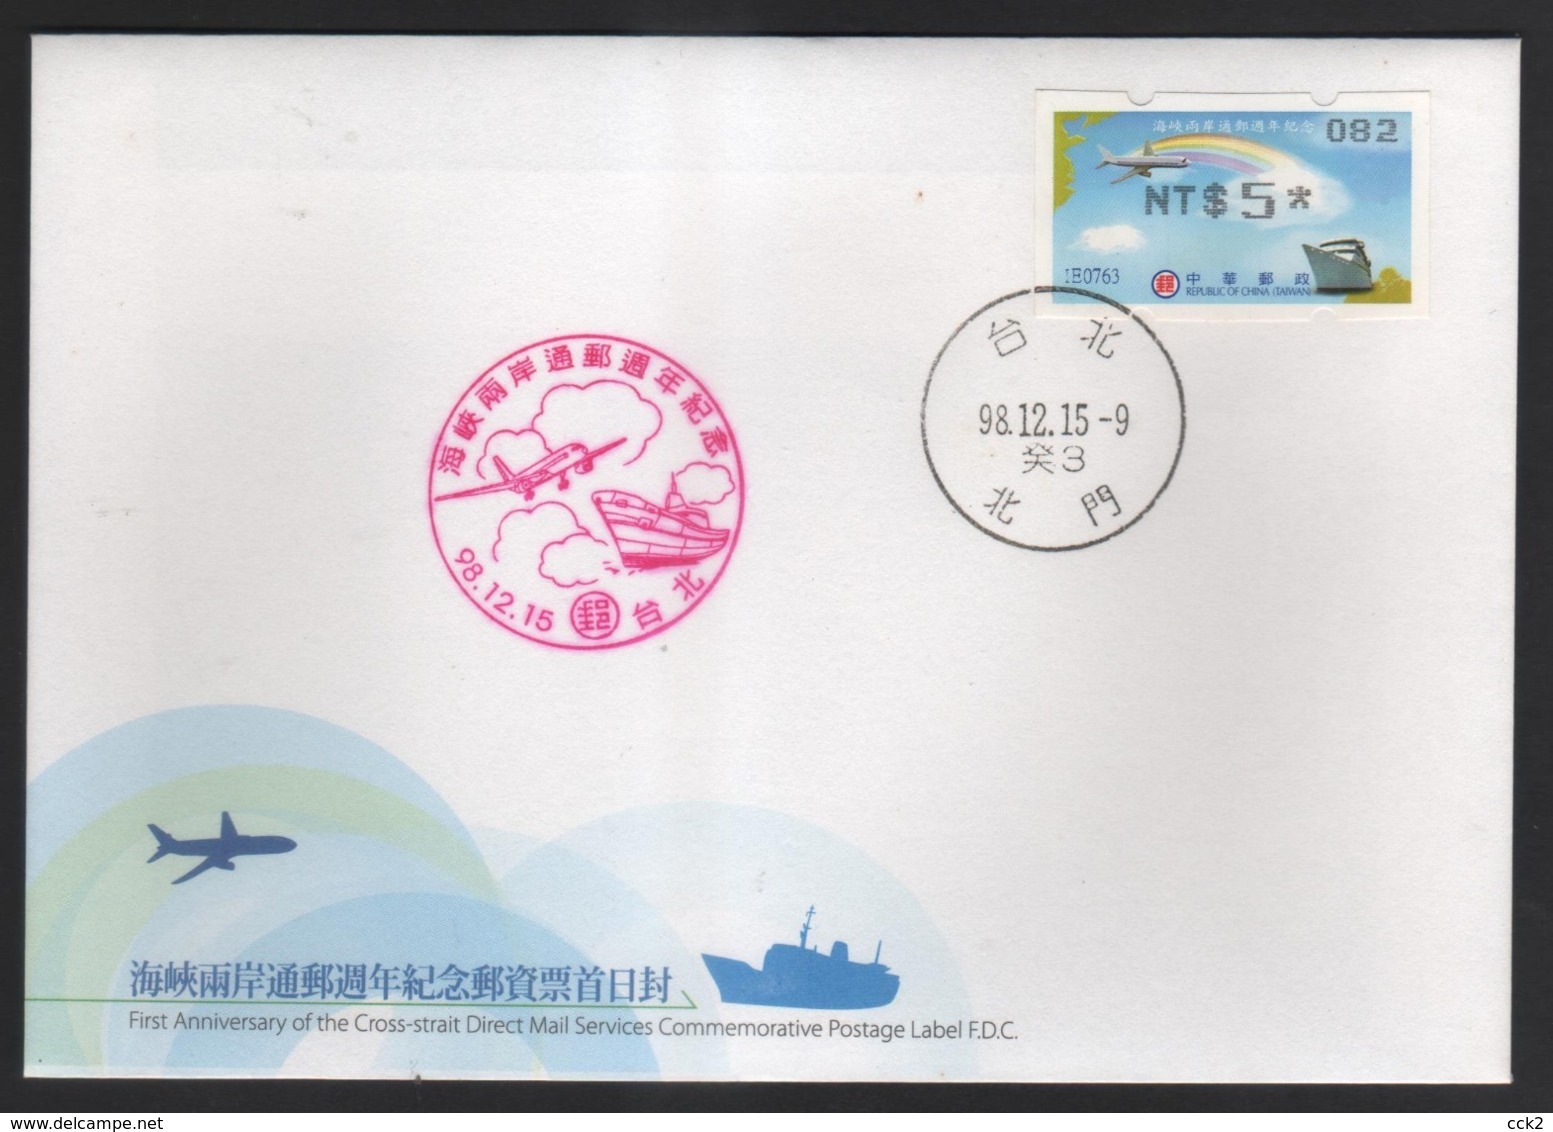 2009 Taiwan R.O.CHINA -FIRST ANNIV. OF THE CROSS-STRAIT DIRECT MAIL SERVICE COMME. FDC #082 - Timbres De Distributeurs [ATM]